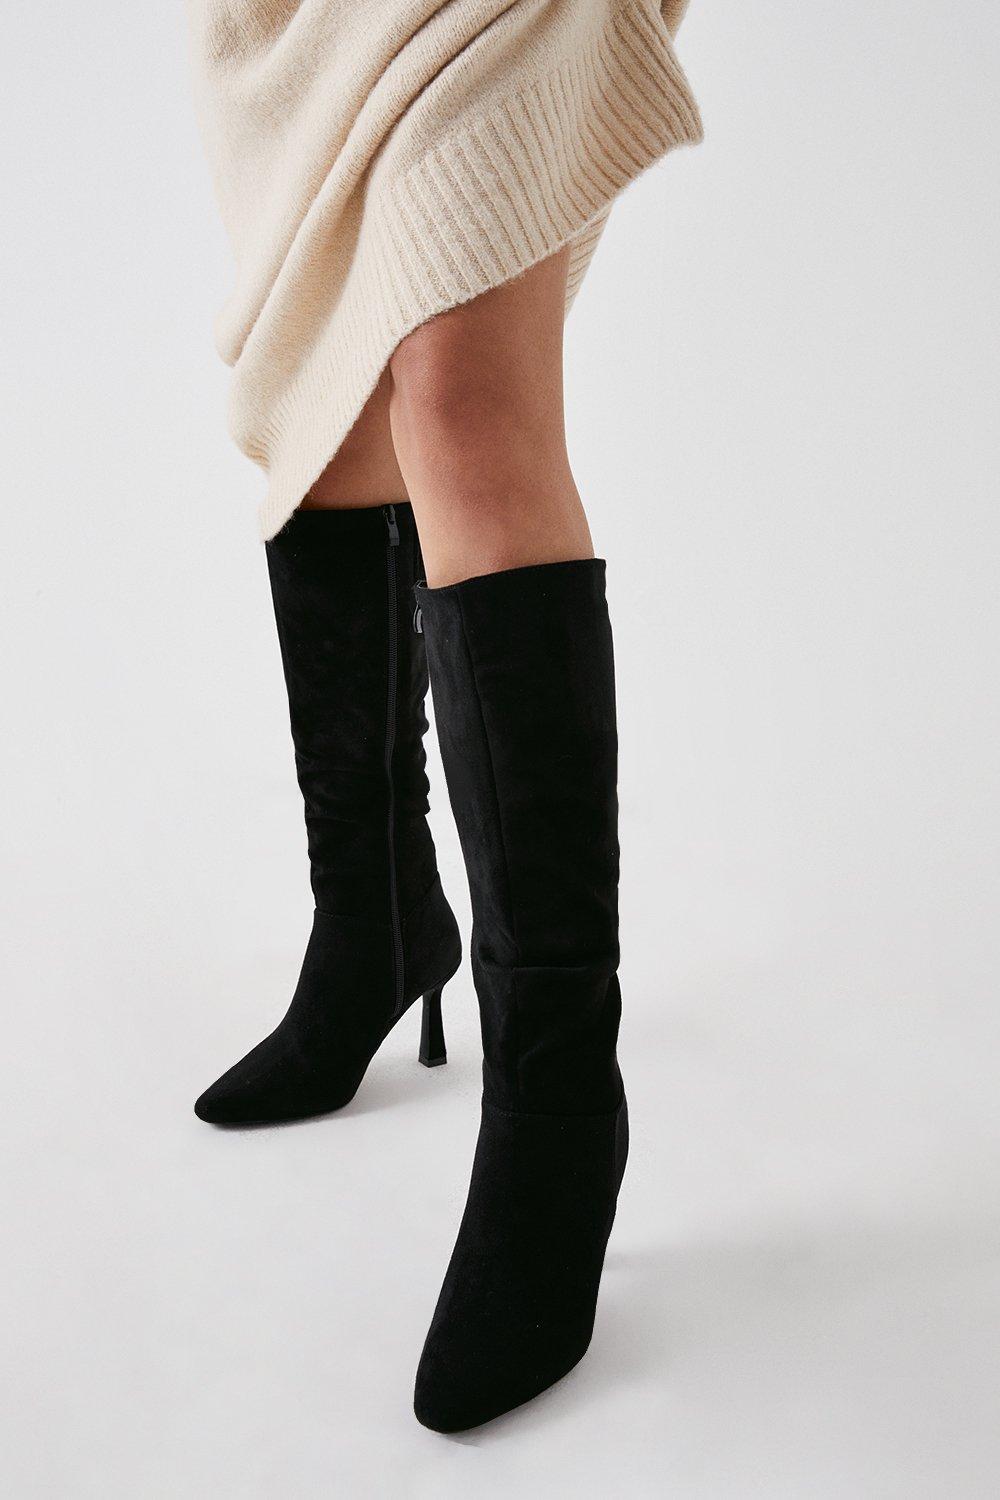 Women's Kristina Knee High Pointed Ruched Boots - natural black - 7